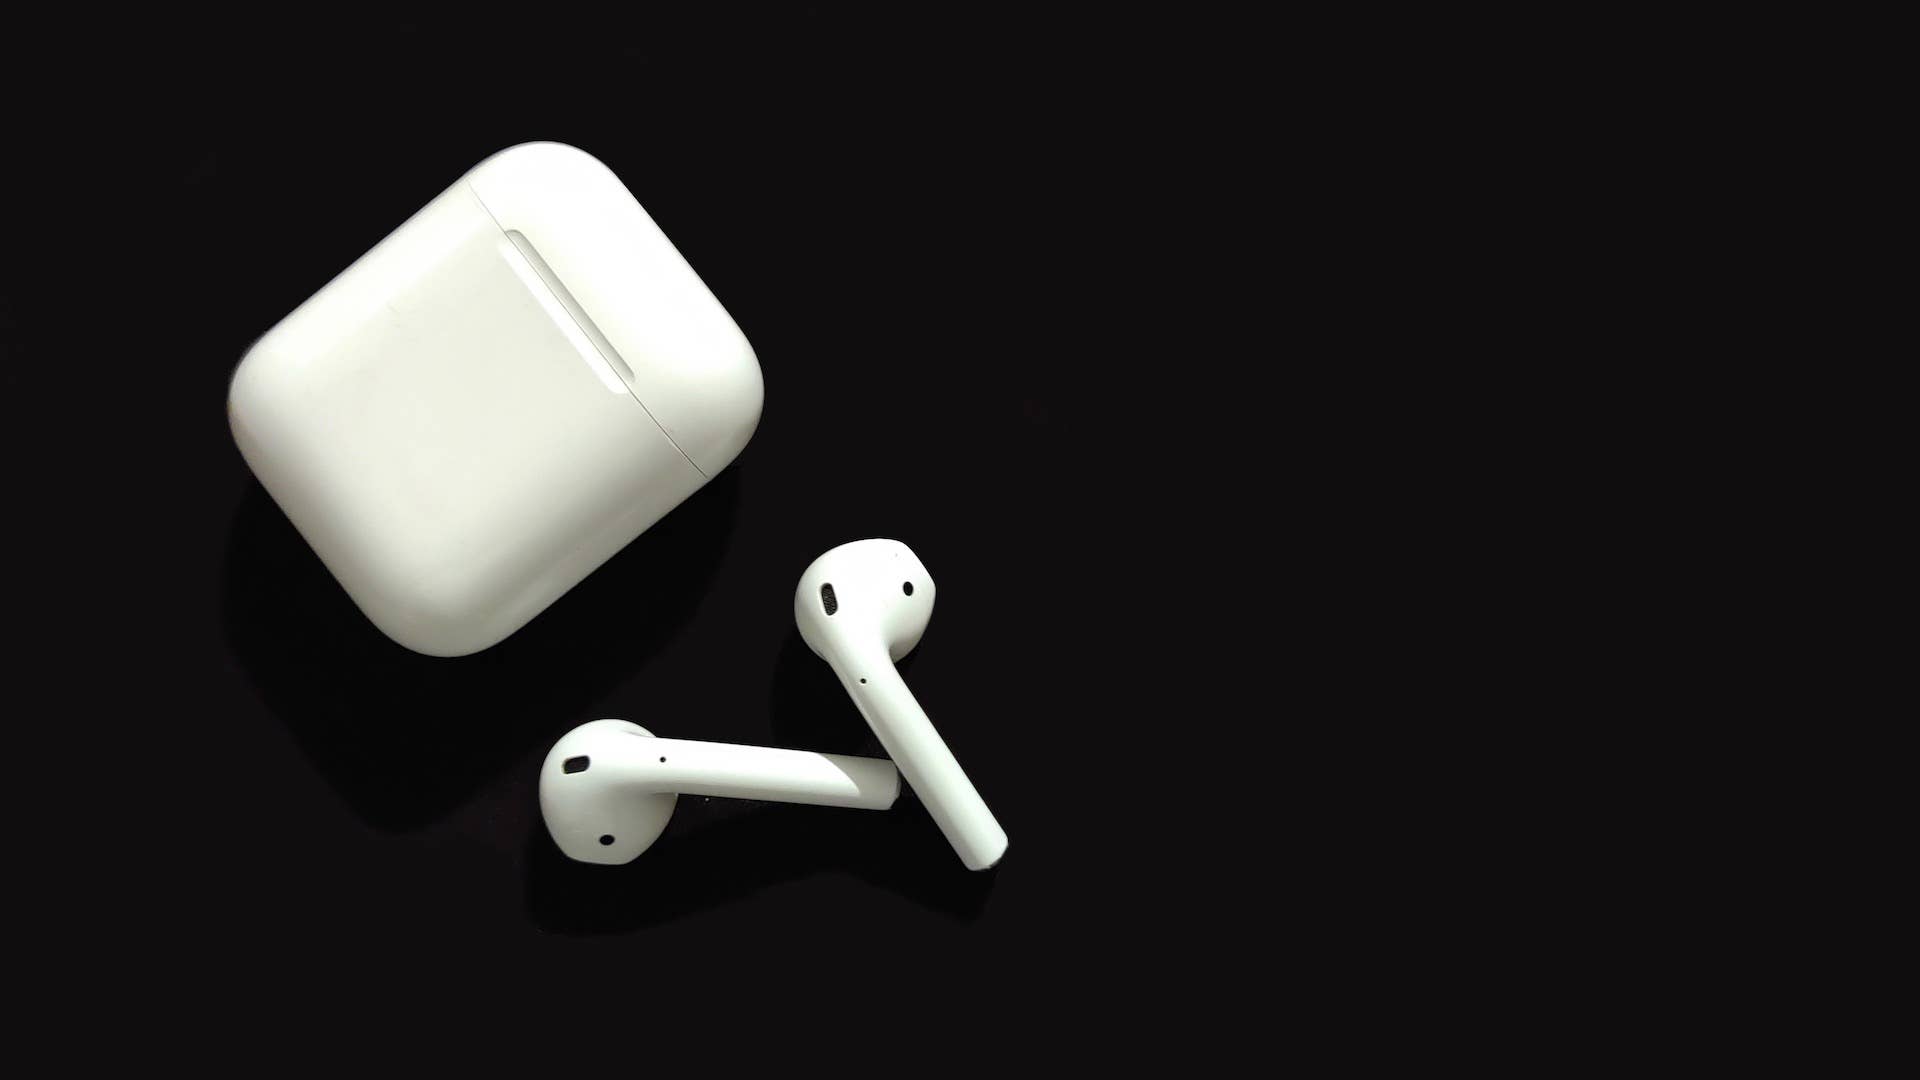 Product shot of Apple, Inc.s' AirPods